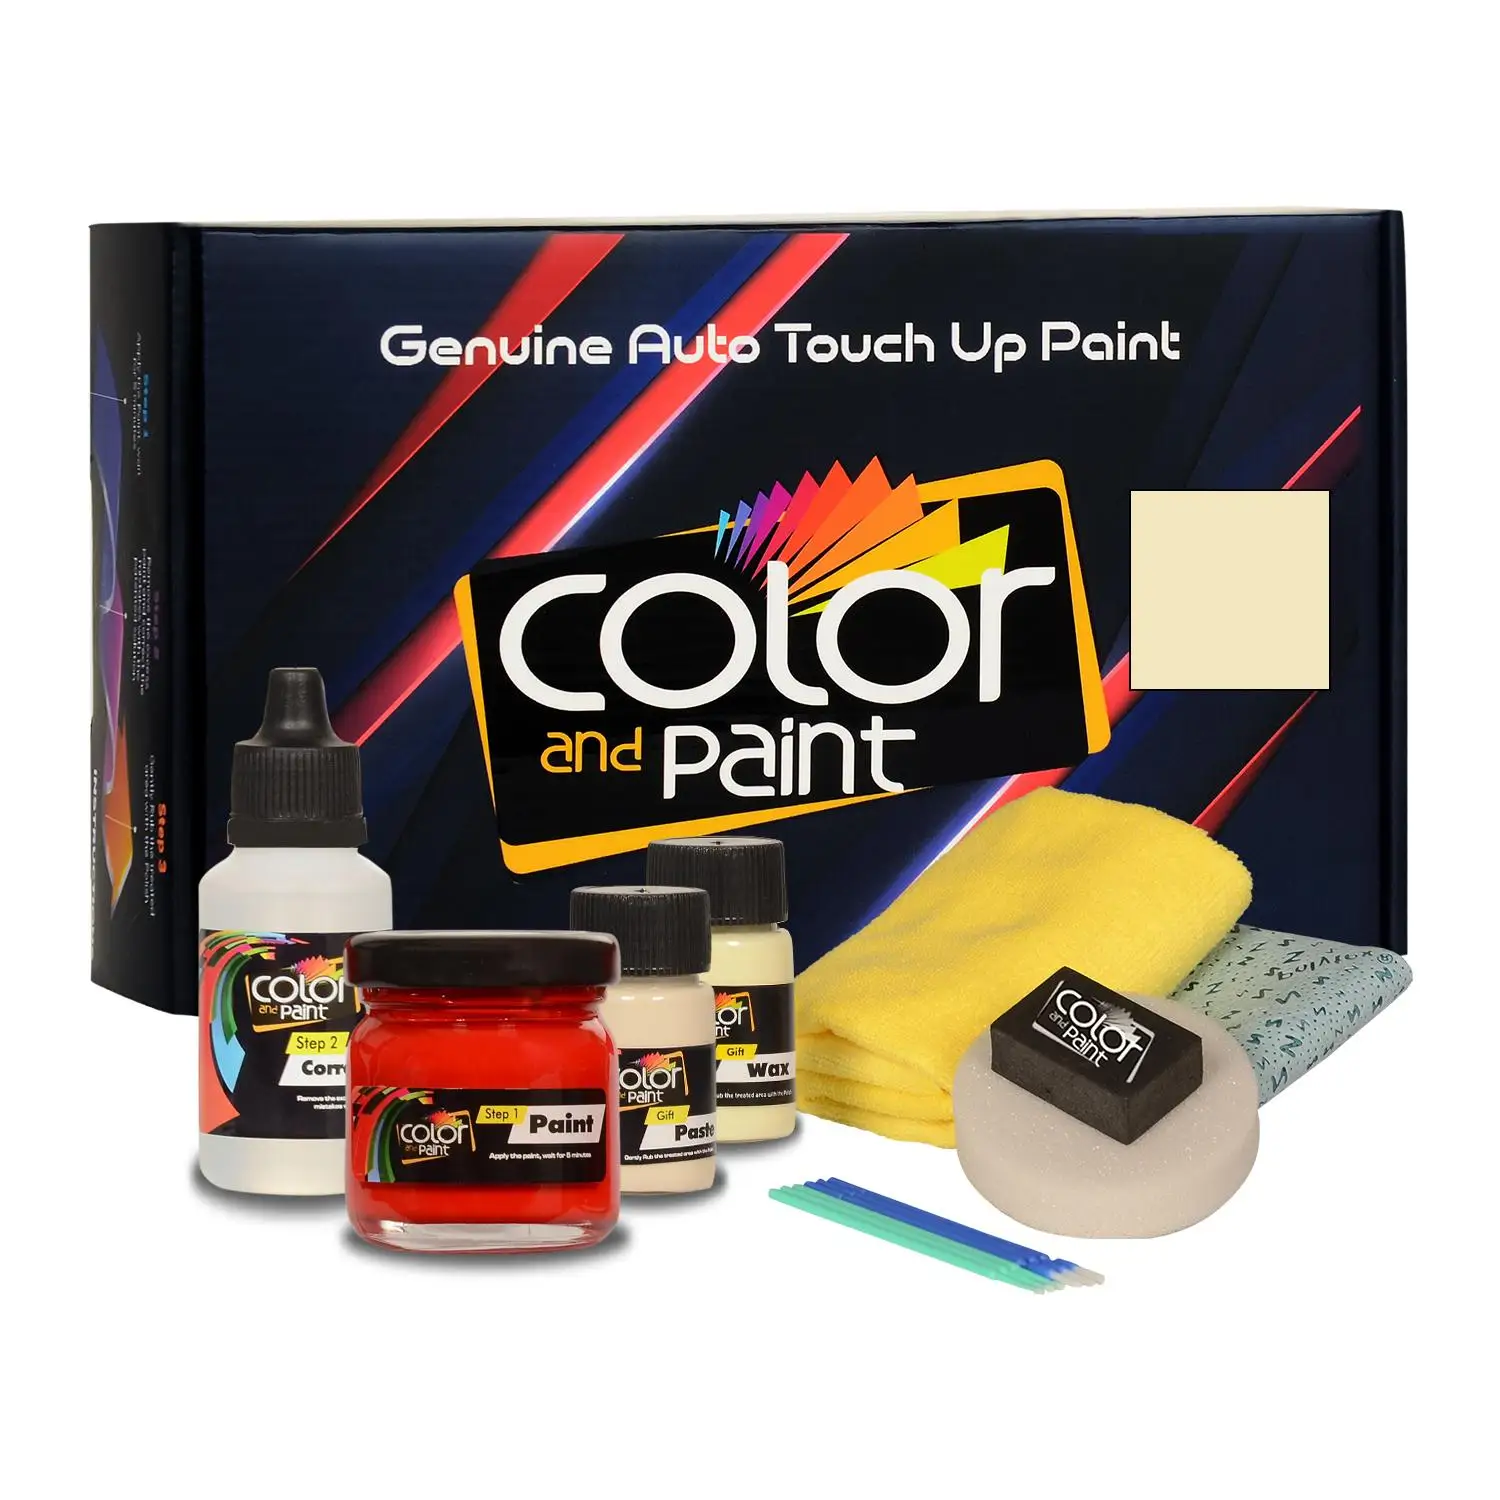 

Color and Paint compatible with Ford America Automotive Touch Up Paint - MEDIUM LIGHT CAMEL - 4 T2 - Plus care